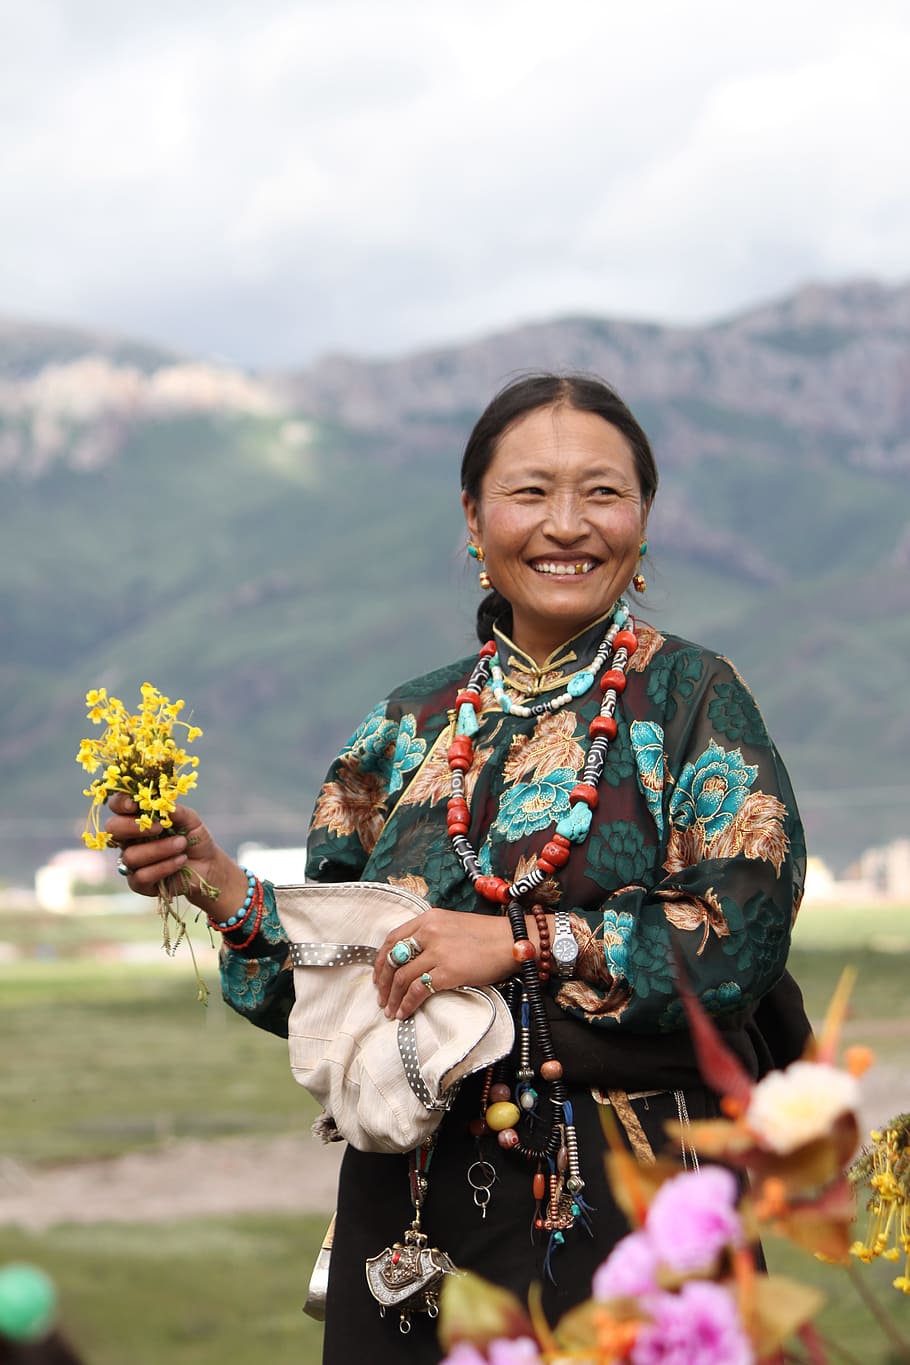 character, tibet ethnic, Character, Tibet, Ethnic, tibet ethnic, hand holding flowers, ms, only women, adults only, one person